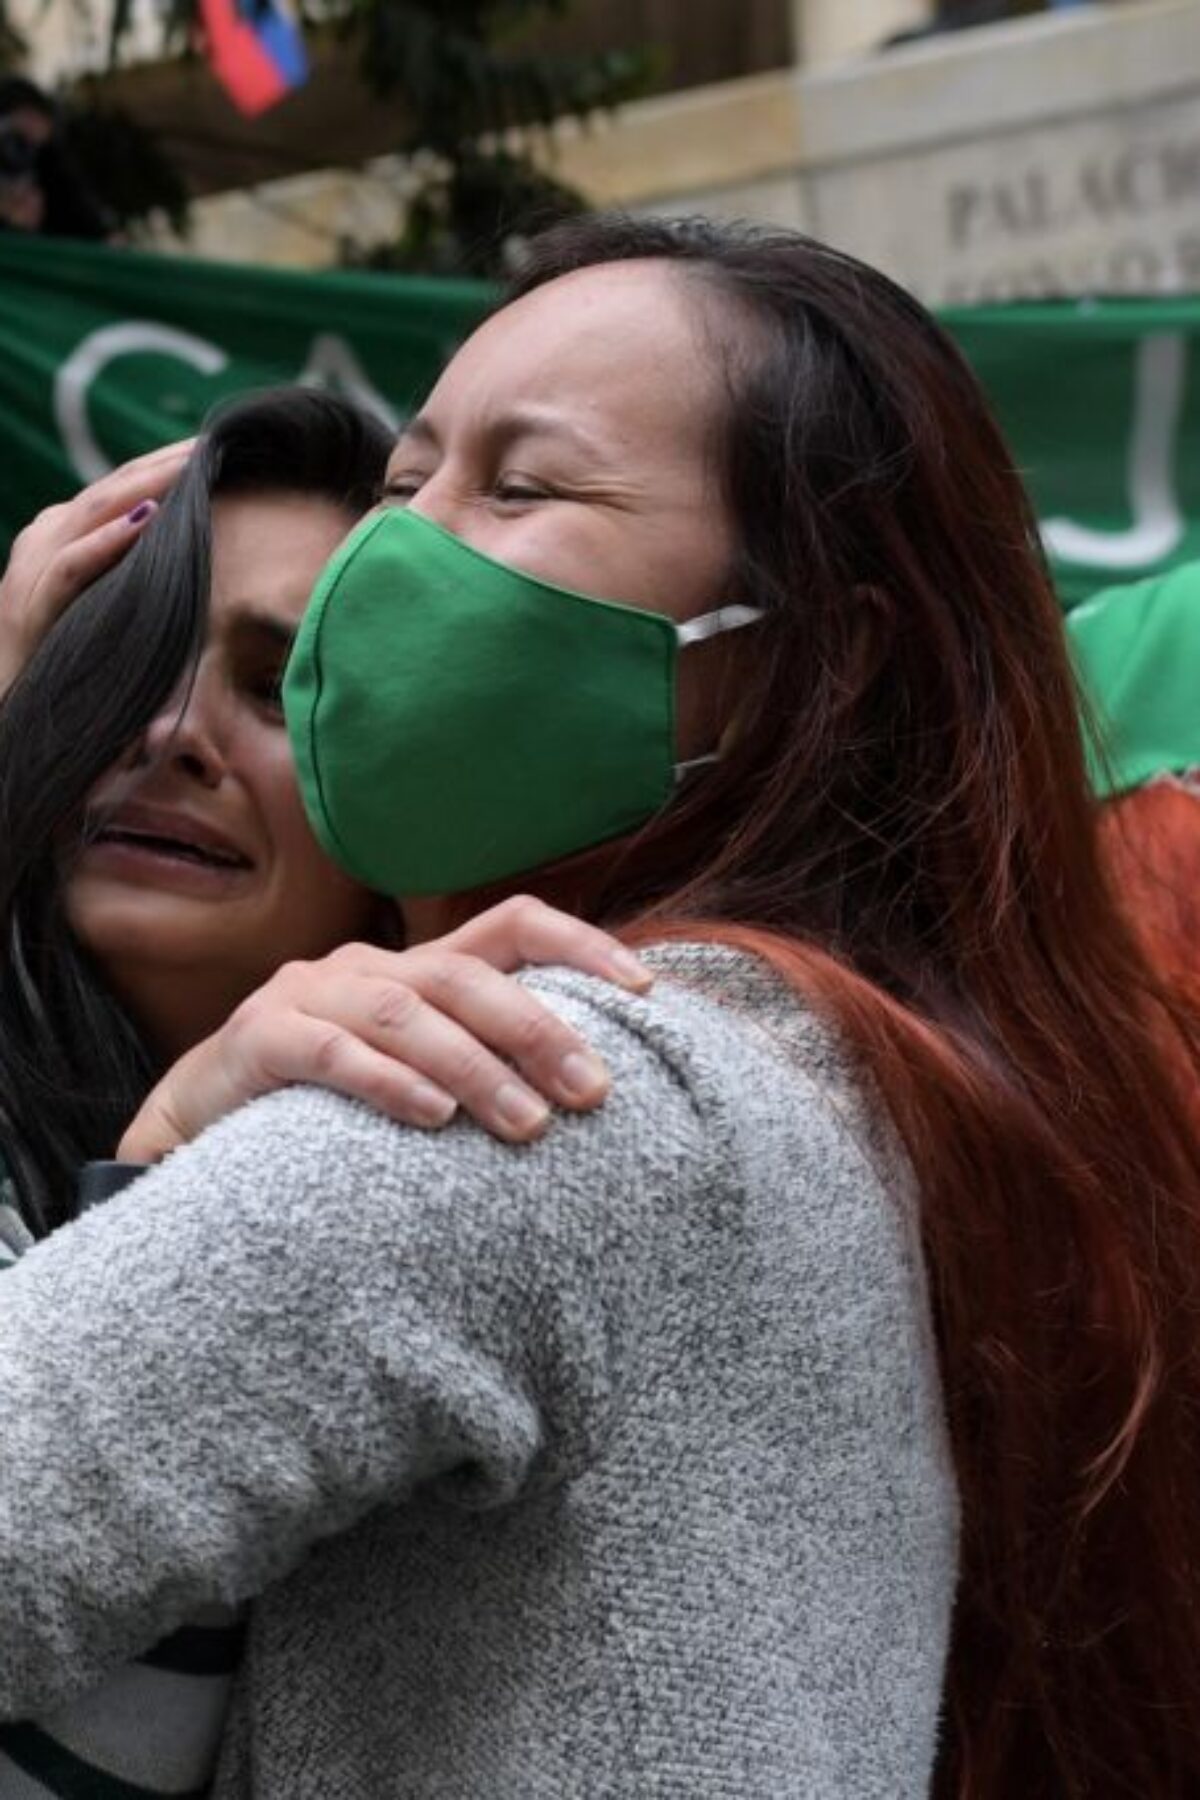 Abortion rights activists celebrate the decision of Colombia's high court to decriminalise abortion up to 24 weeks of pregnancy in Bogota, on February 21, 2022. (Photo by Raul ARBOLEDA / AFP) (Photo by RAUL ARBOLEDA/AFP via Getty Images)